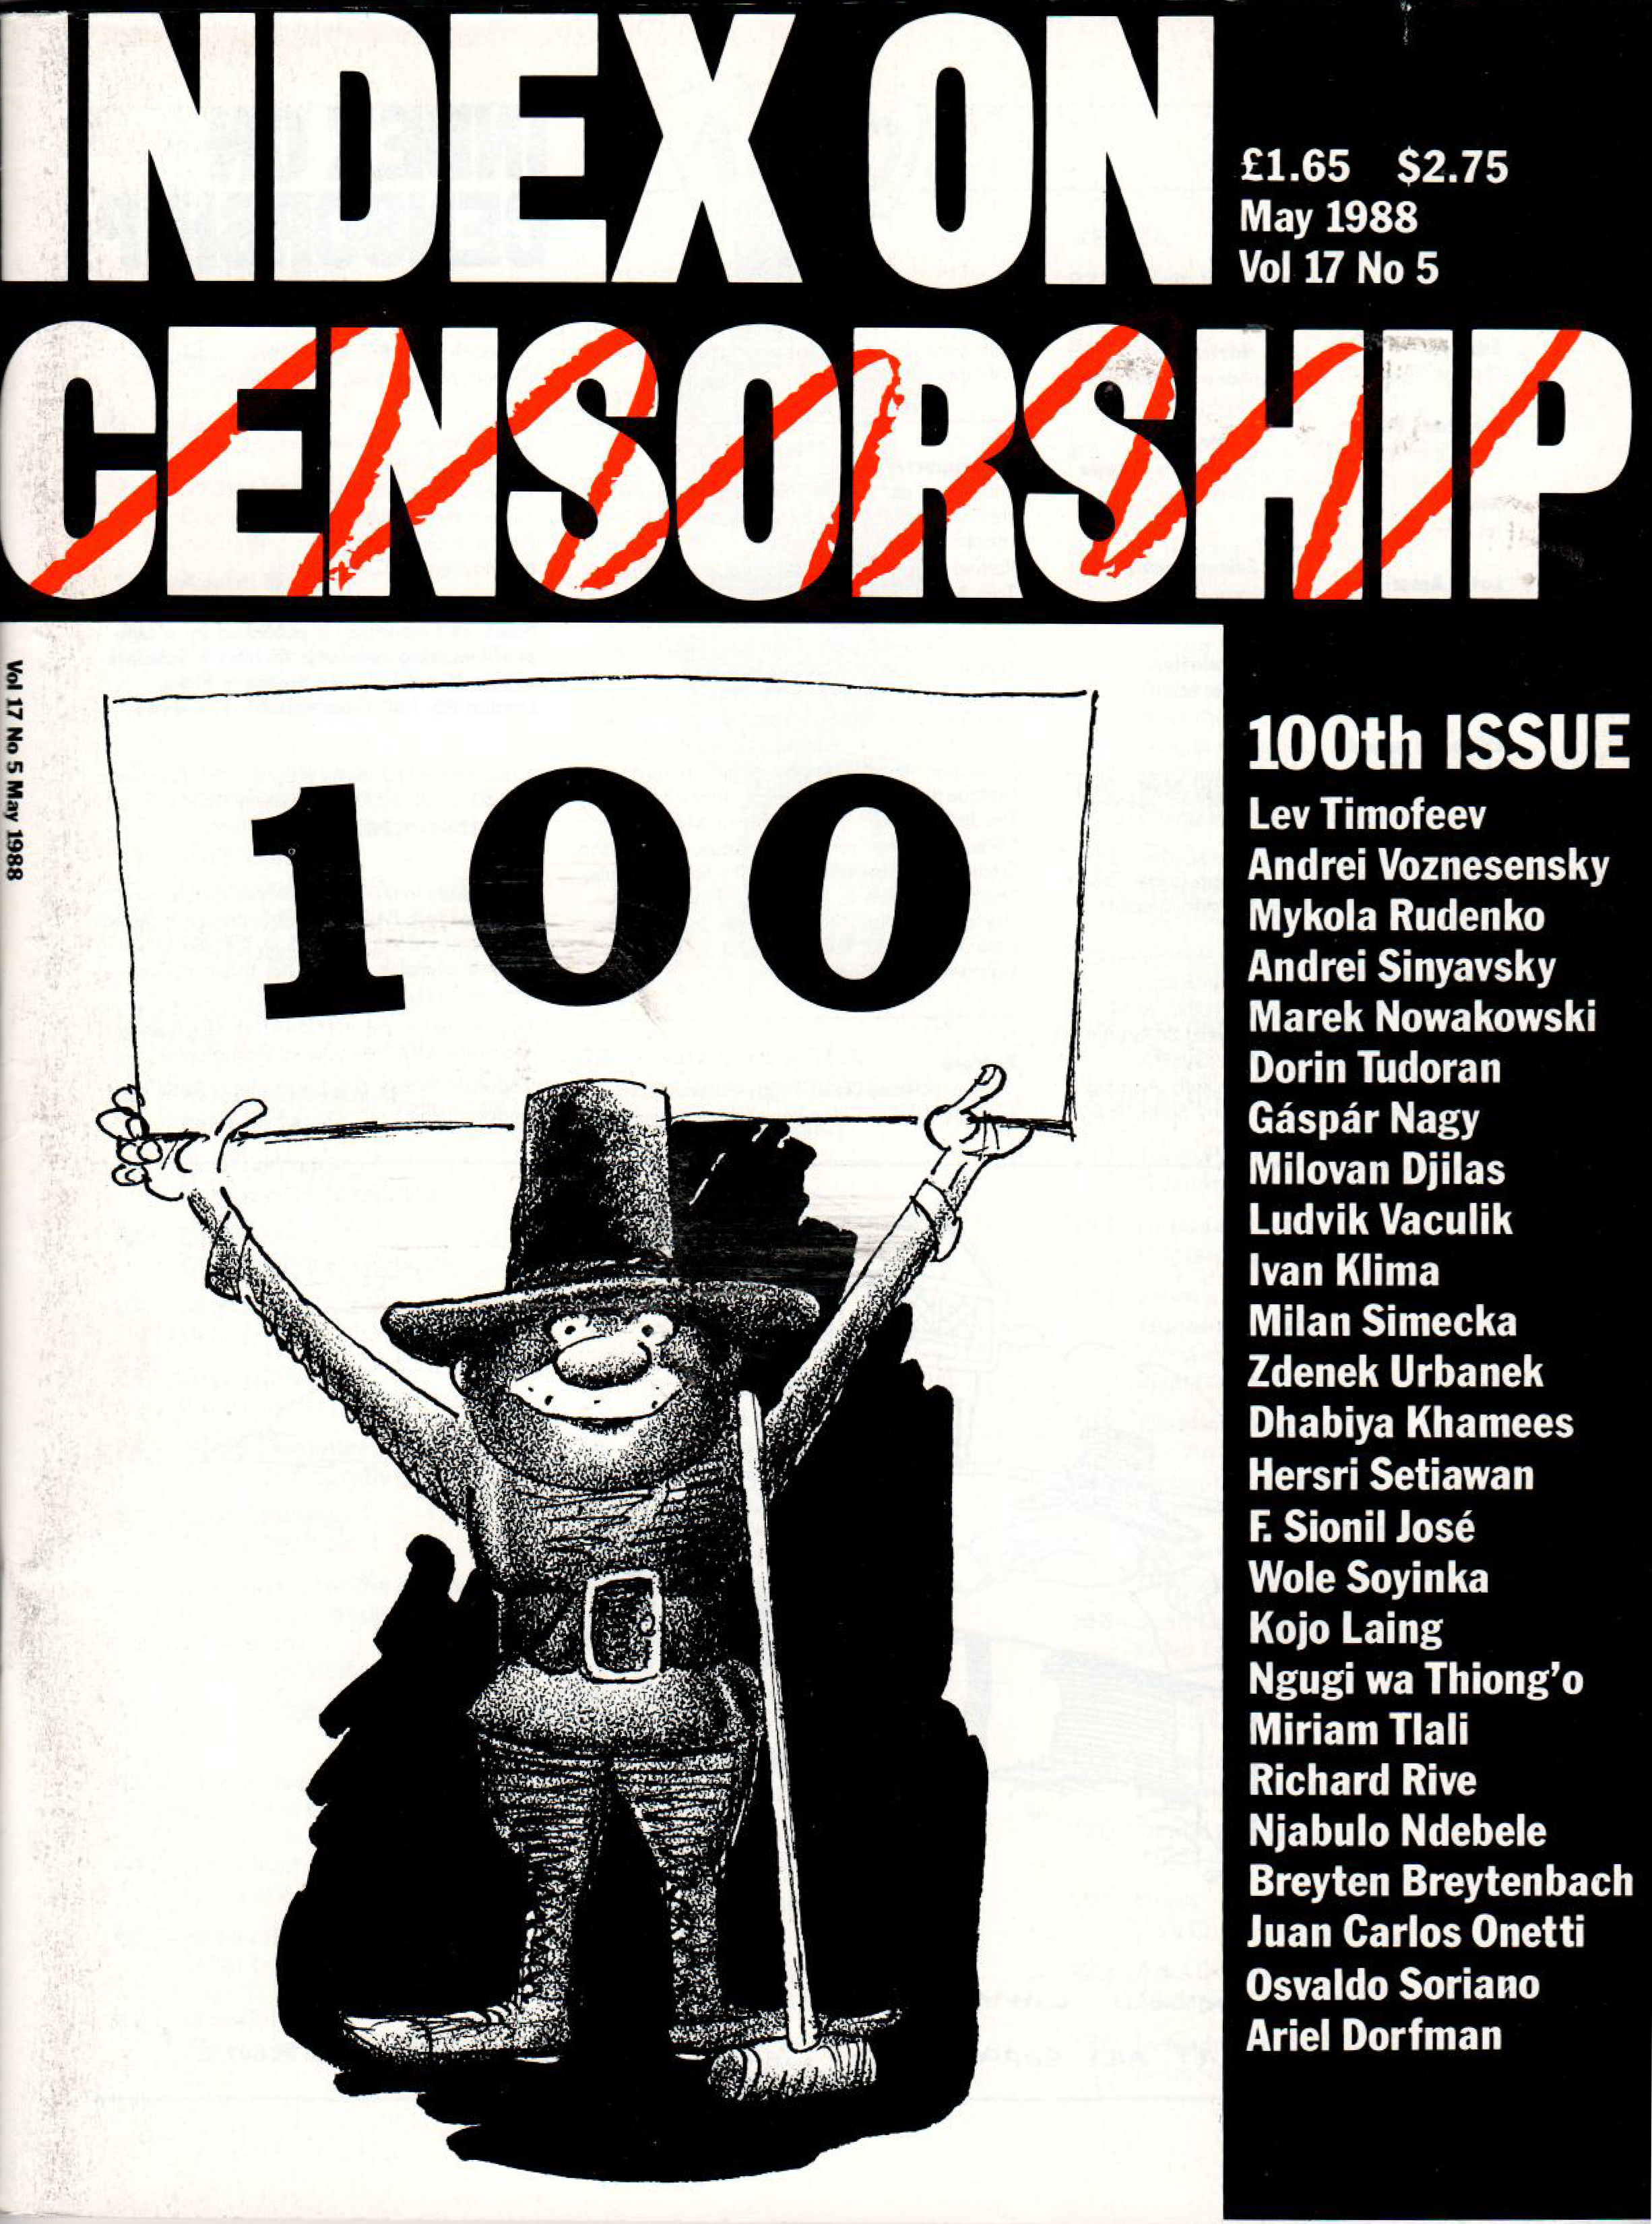 100th Issue , the May 1988 issue of Index on Censorship magazine.